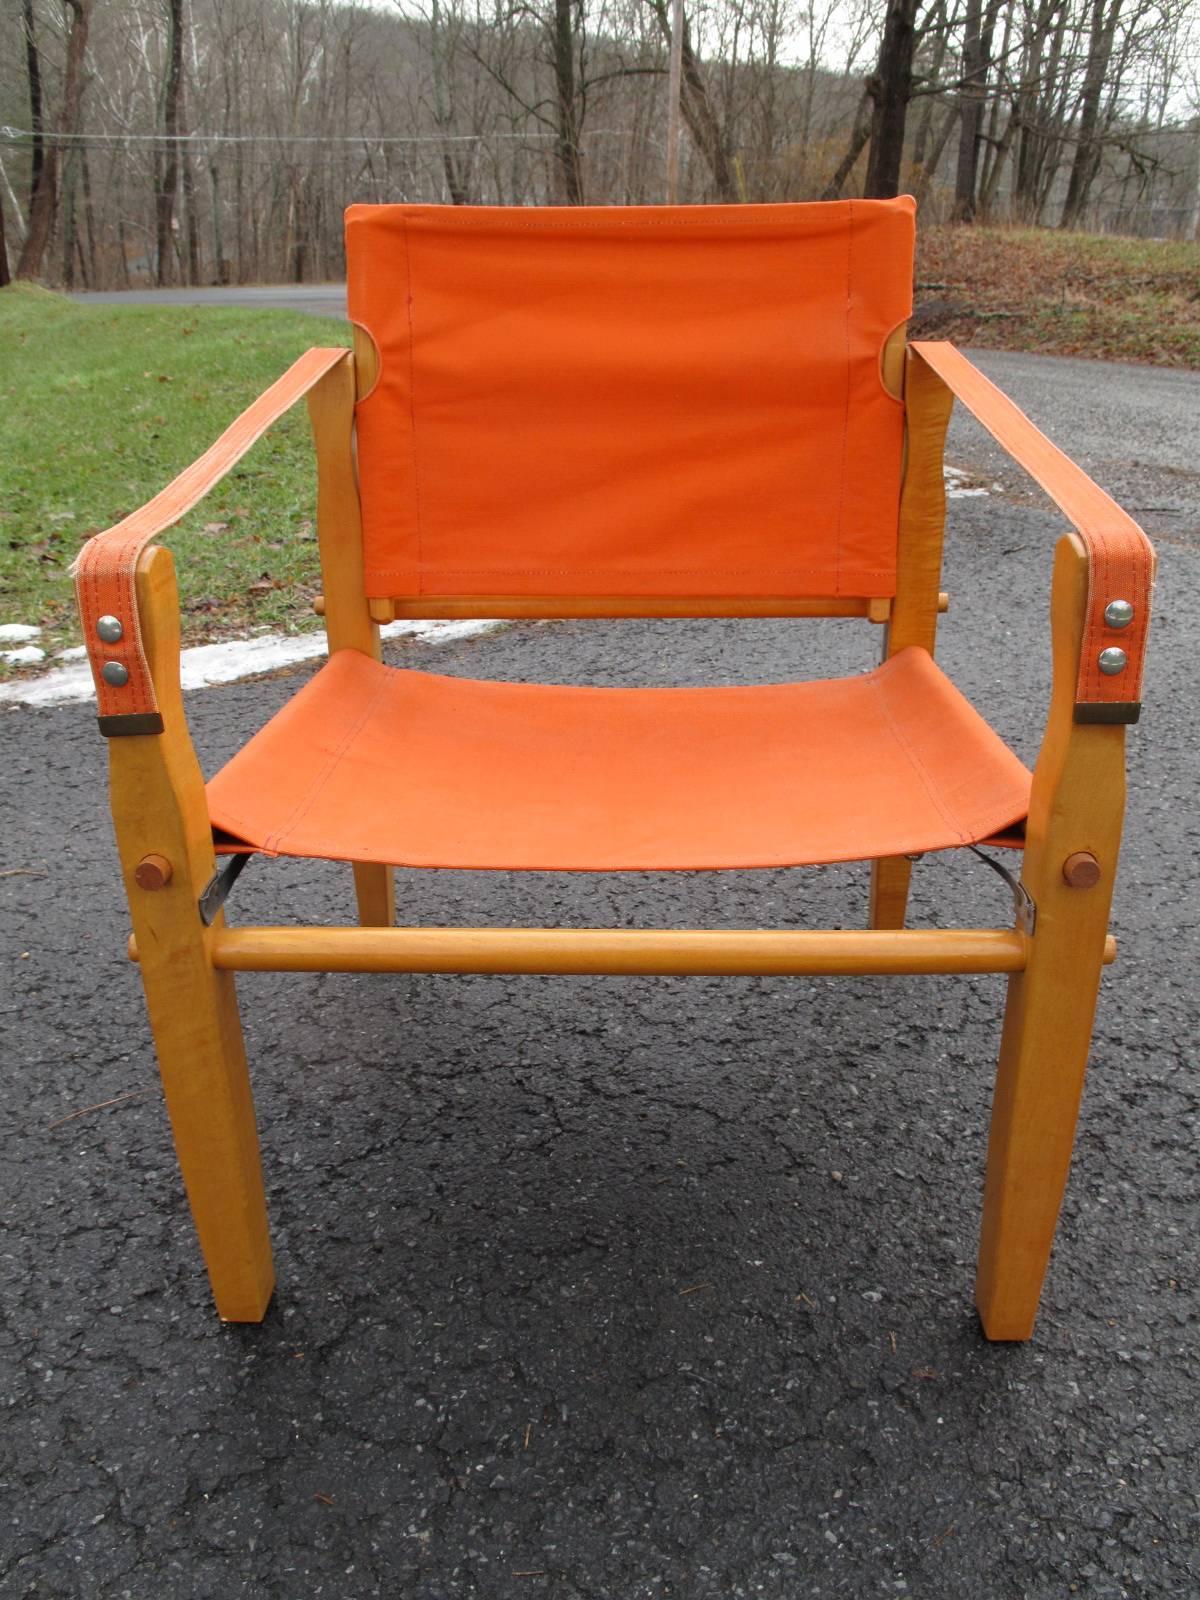 Oak pegged frame with orange canvas seat or back. Original label from Racine, Wisconsin intact as shown.